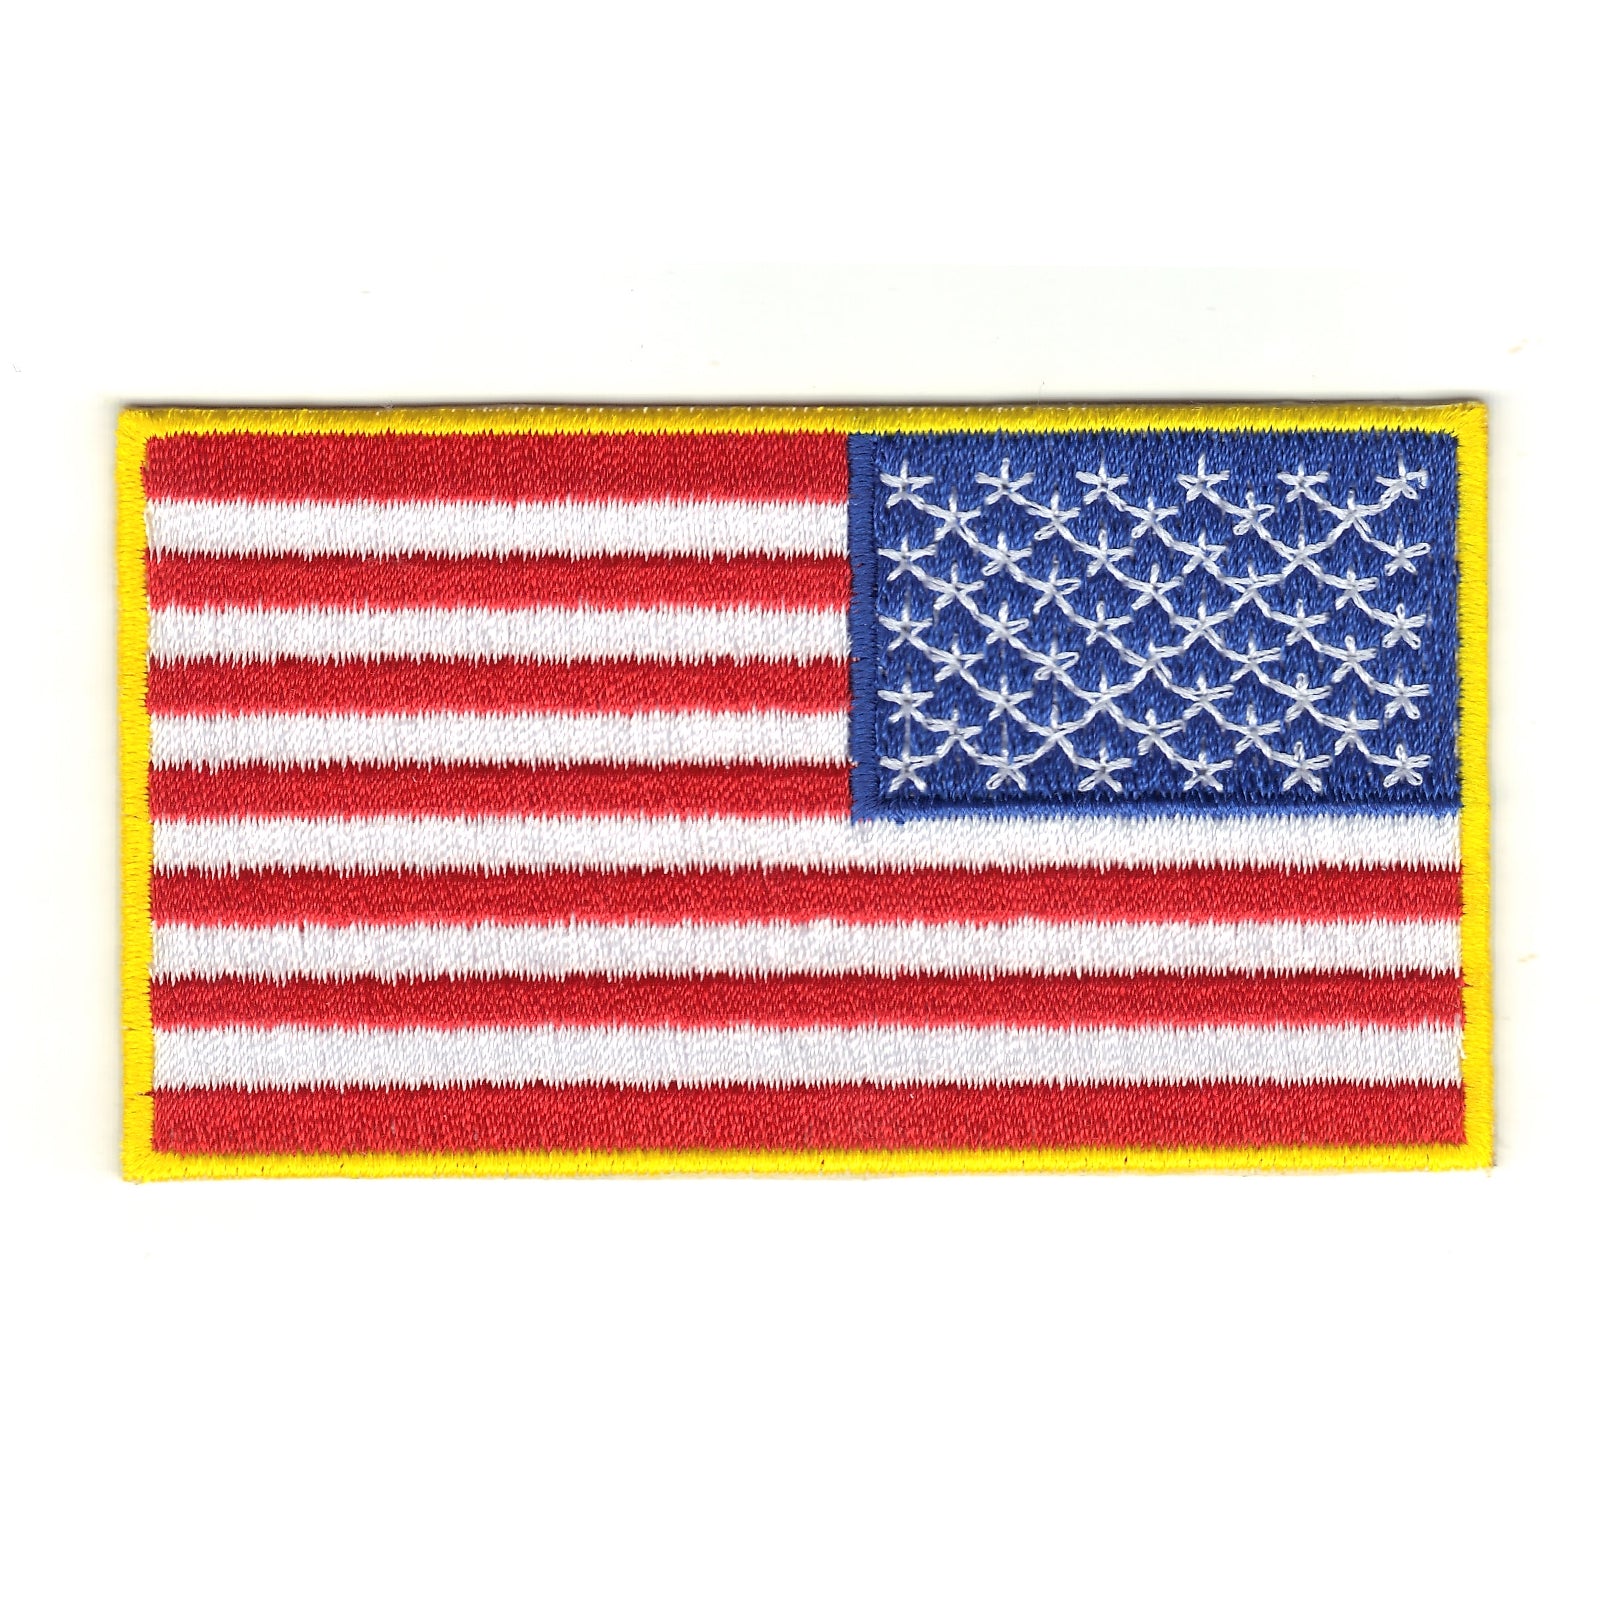 United States of America U.S.A. Military Army Color Reverse Country Flag Patch 